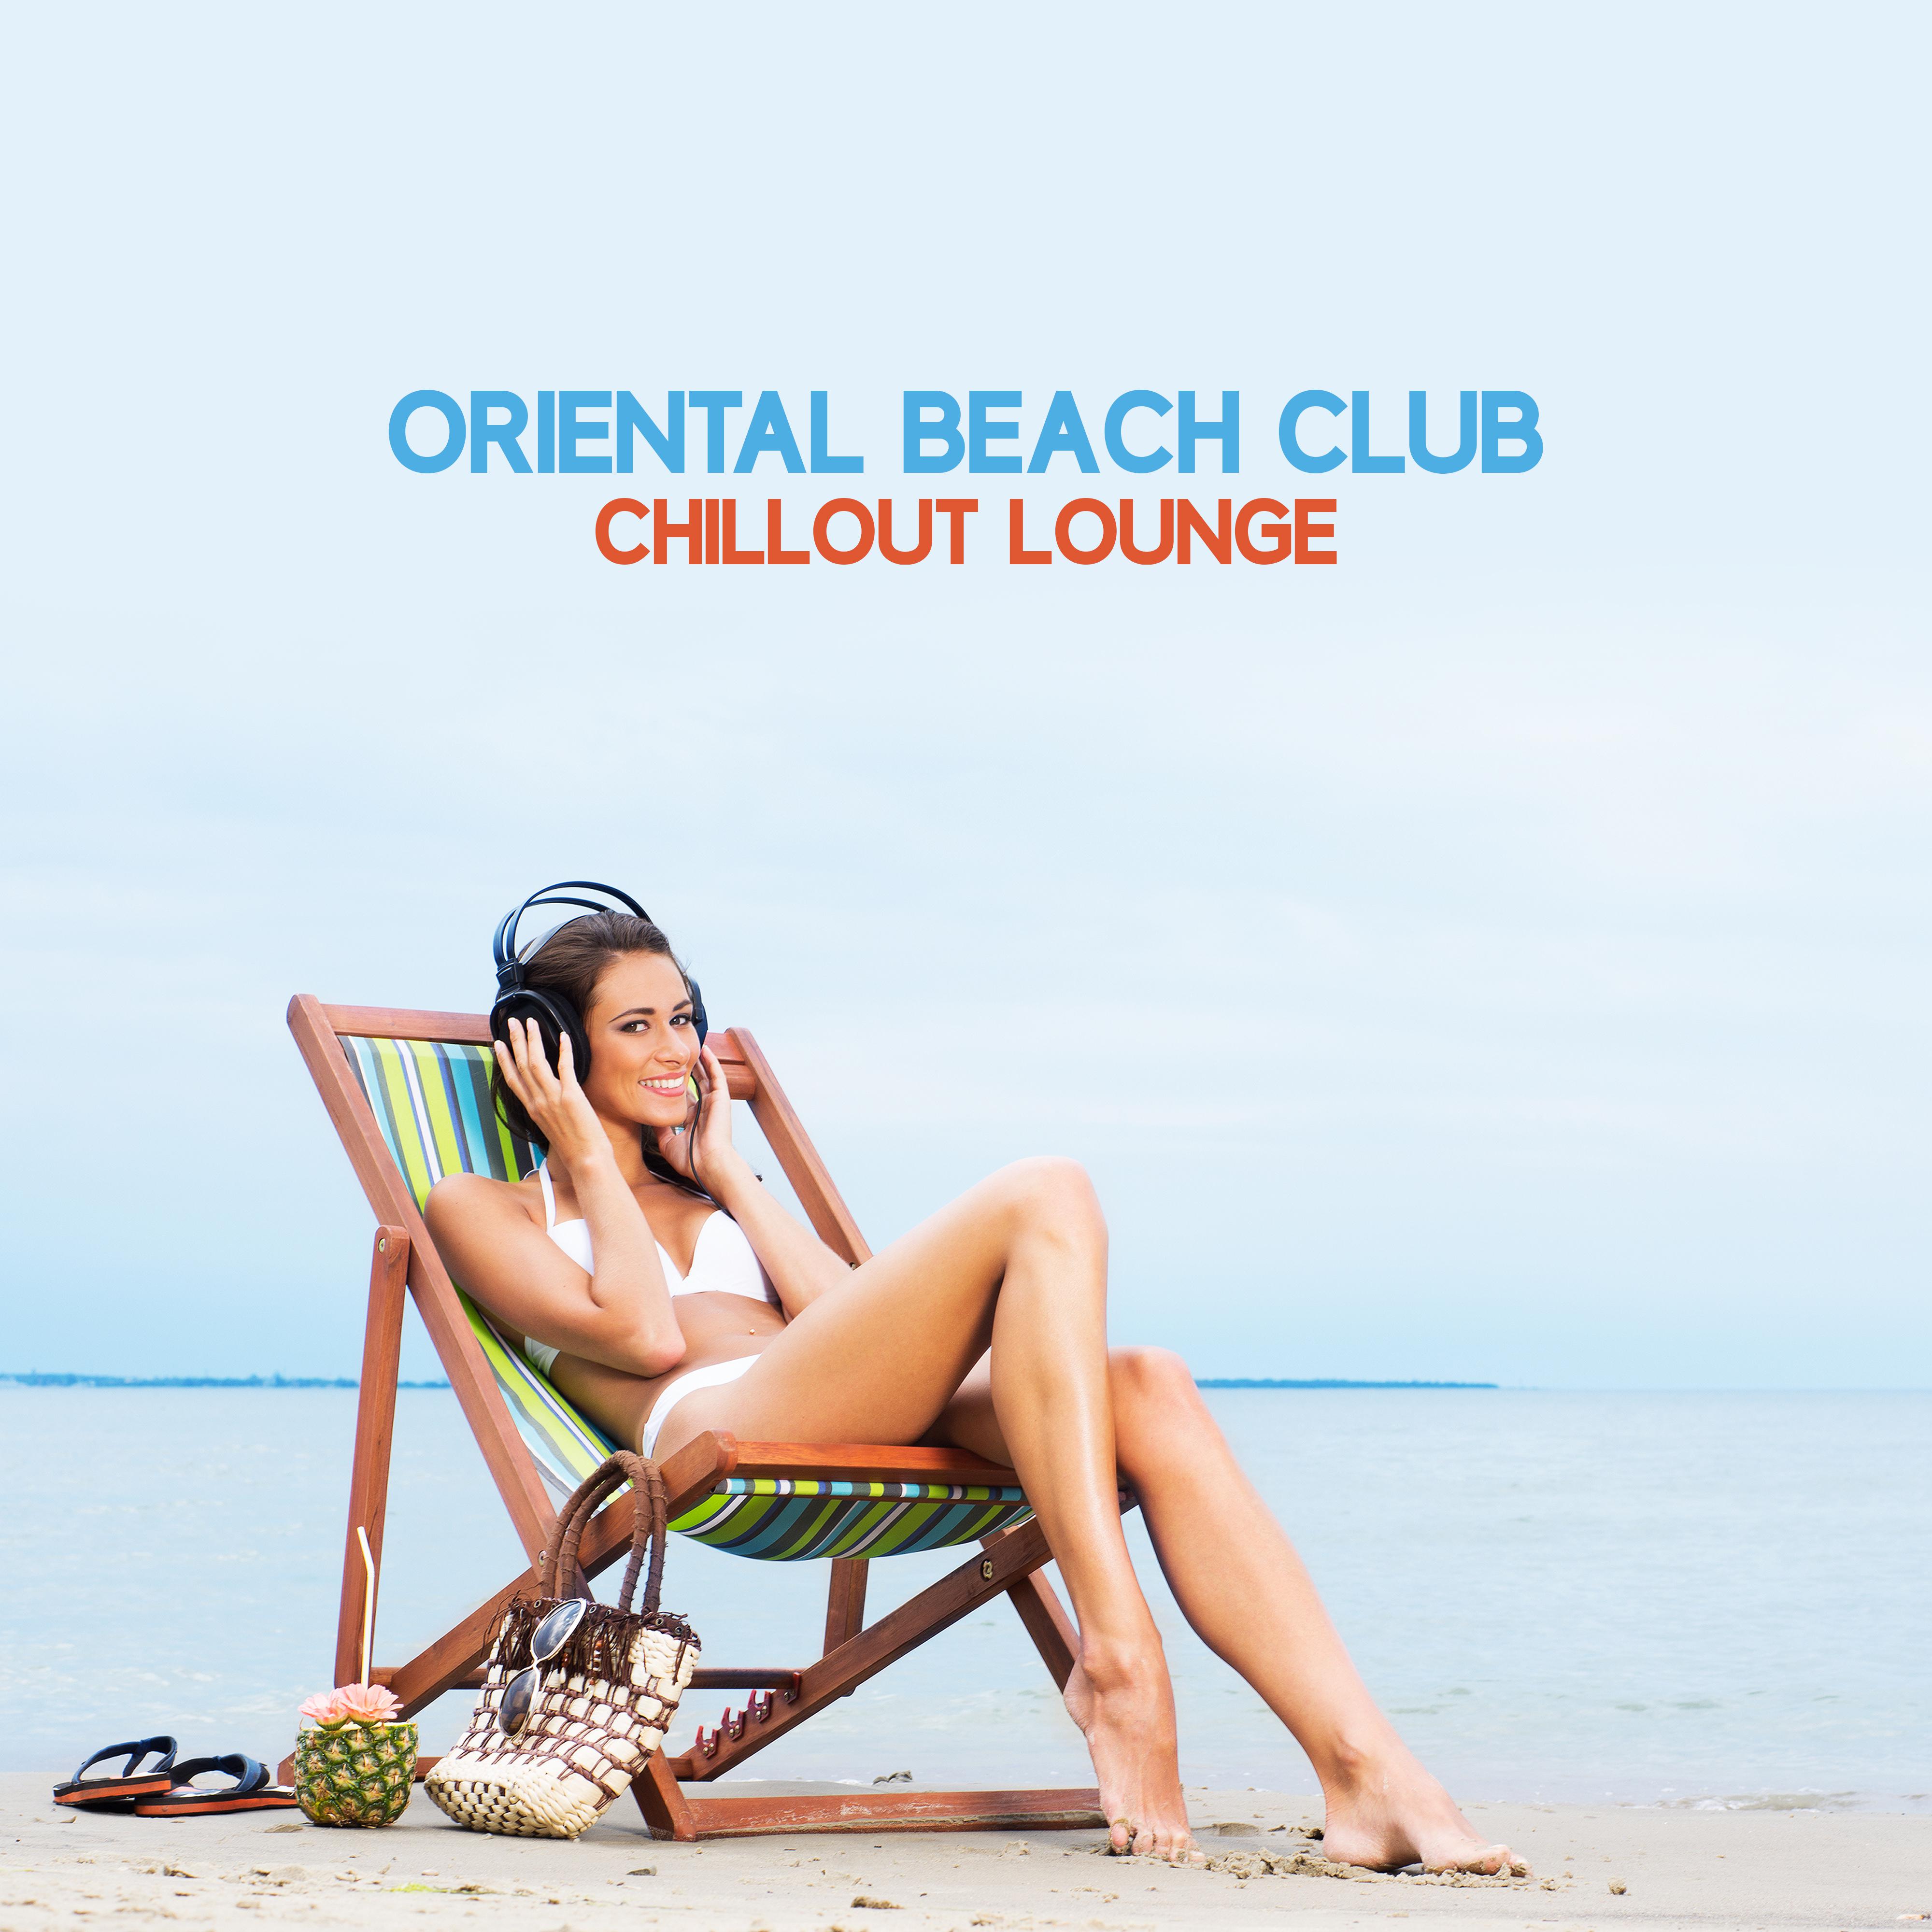 Oriental Beach Club Chillout Lounge: 2019 Total Summer Chill Out Music Compilation, Best Holiday Beats, Tropical Beach Vibes, Full Rest & Relax Sunny Melodies